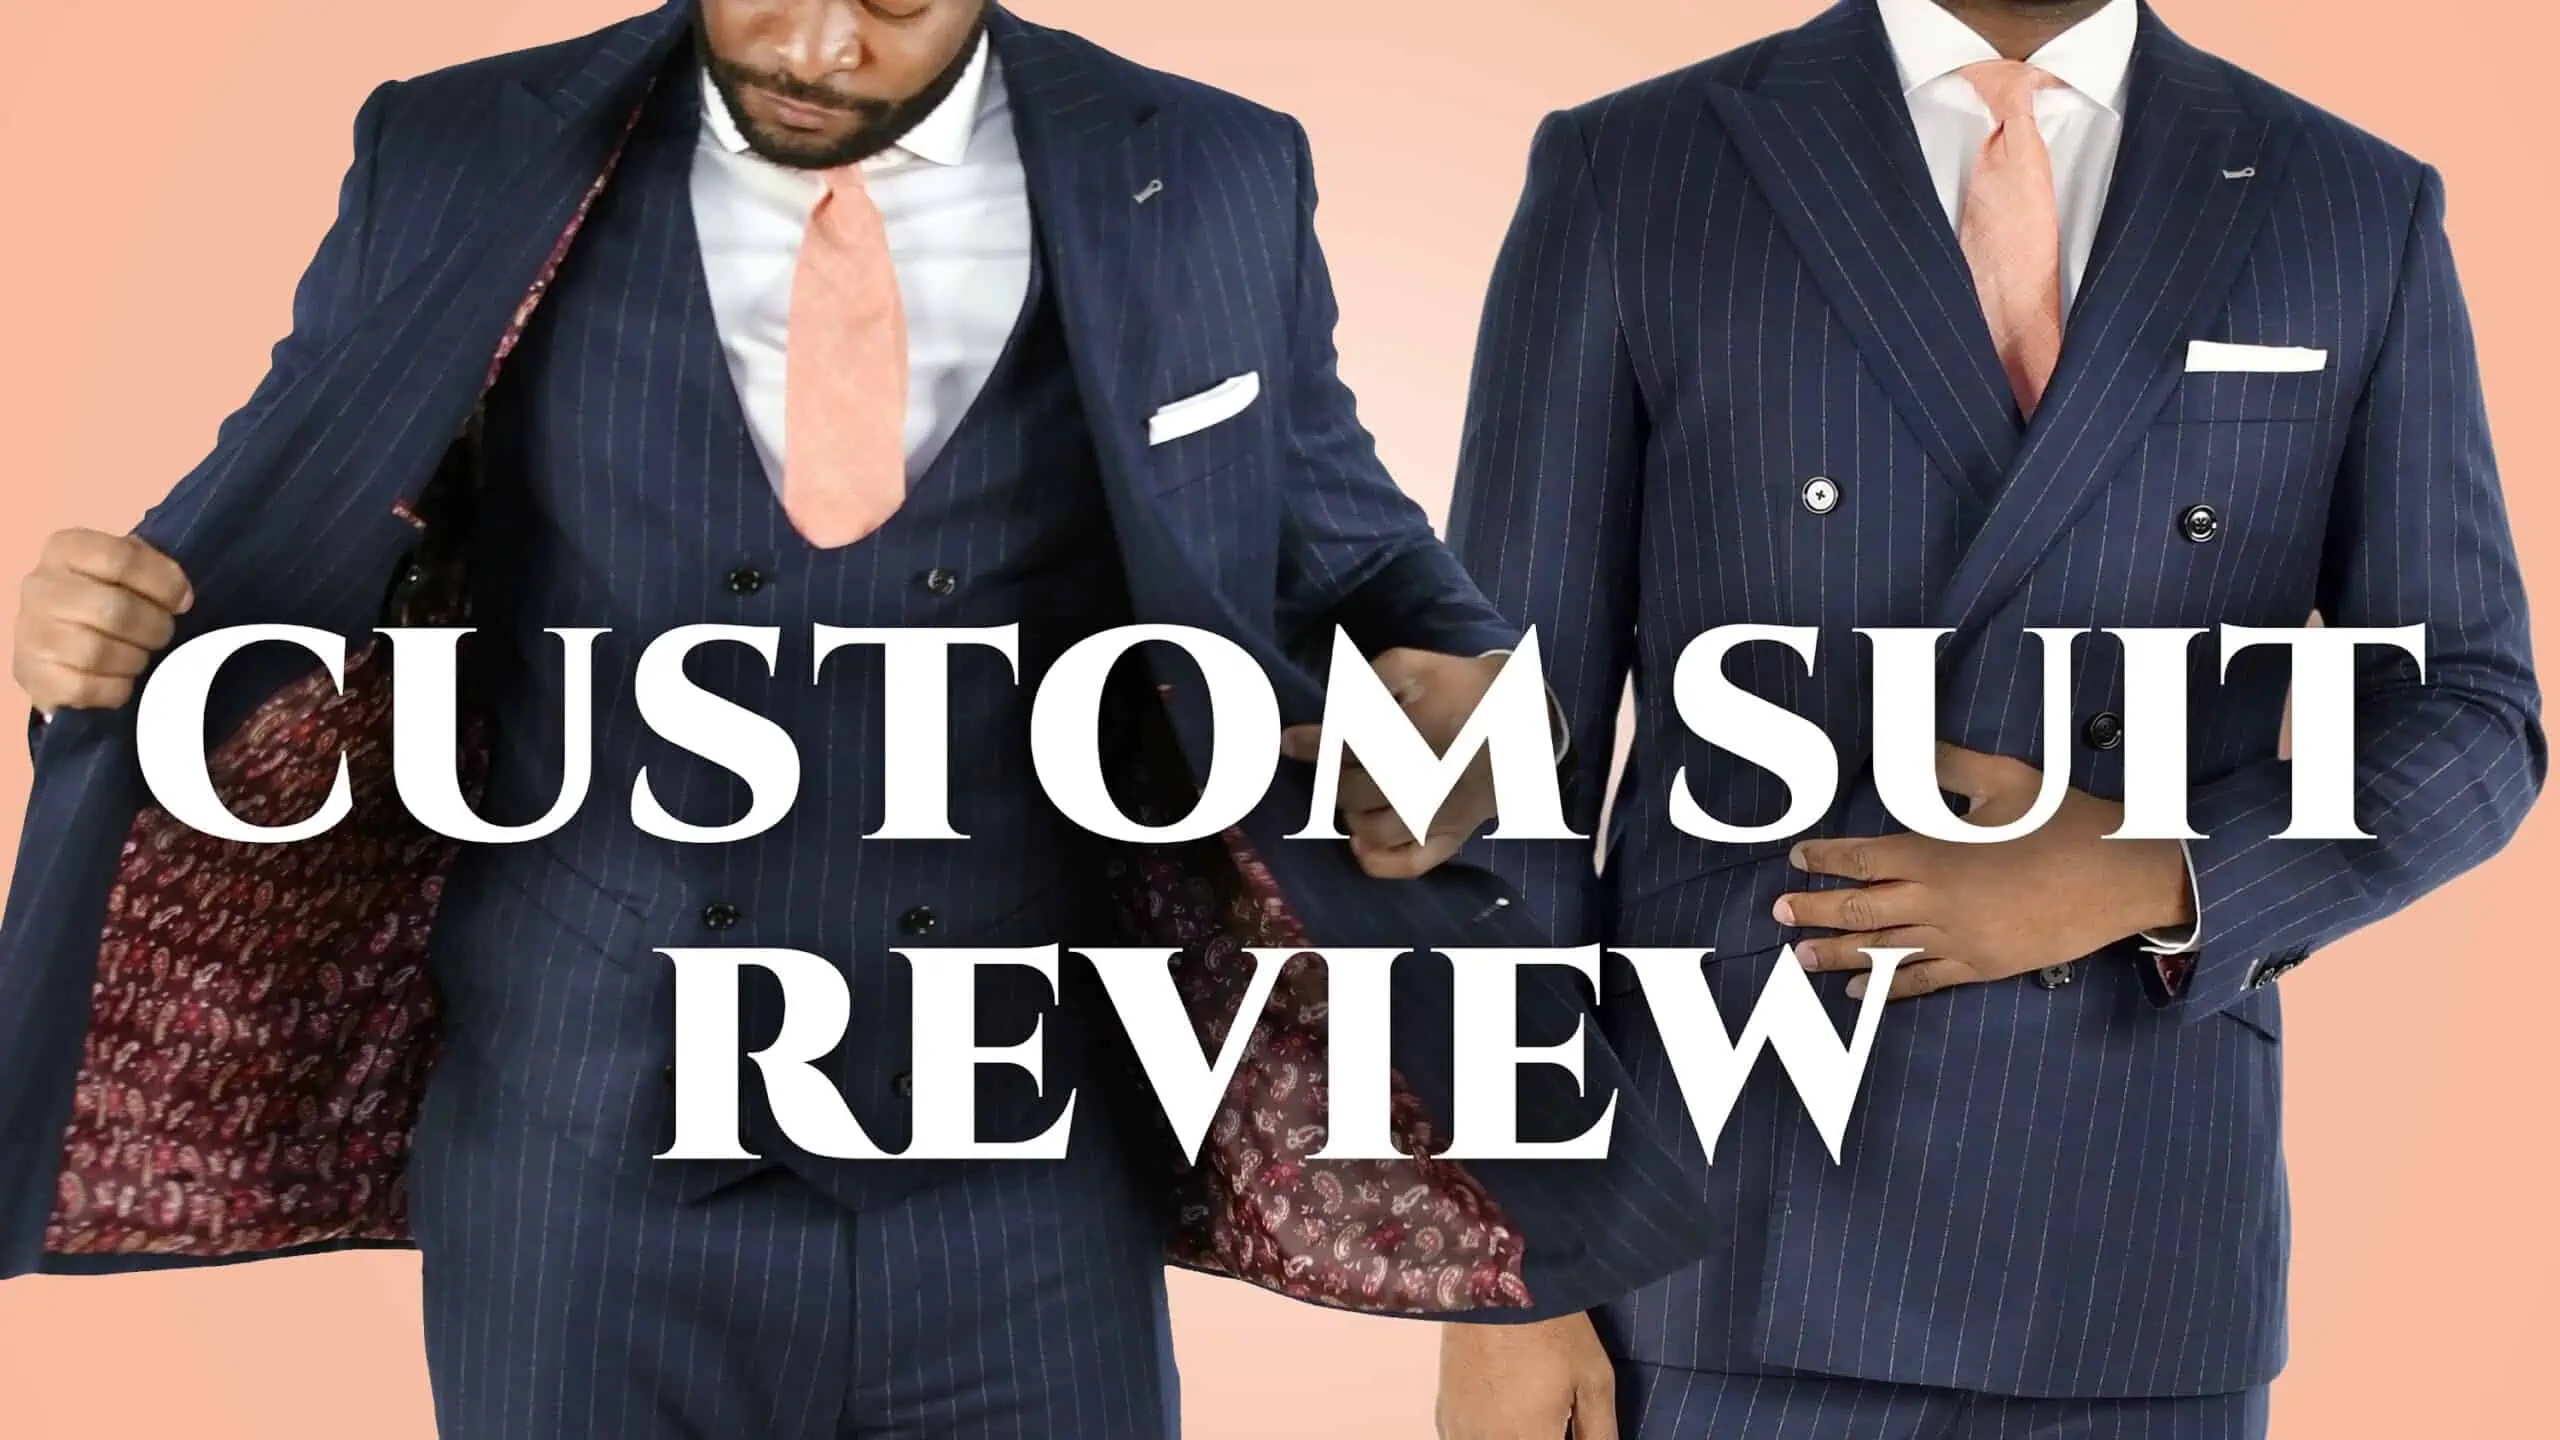 custom suit review 3840x2160 scaled